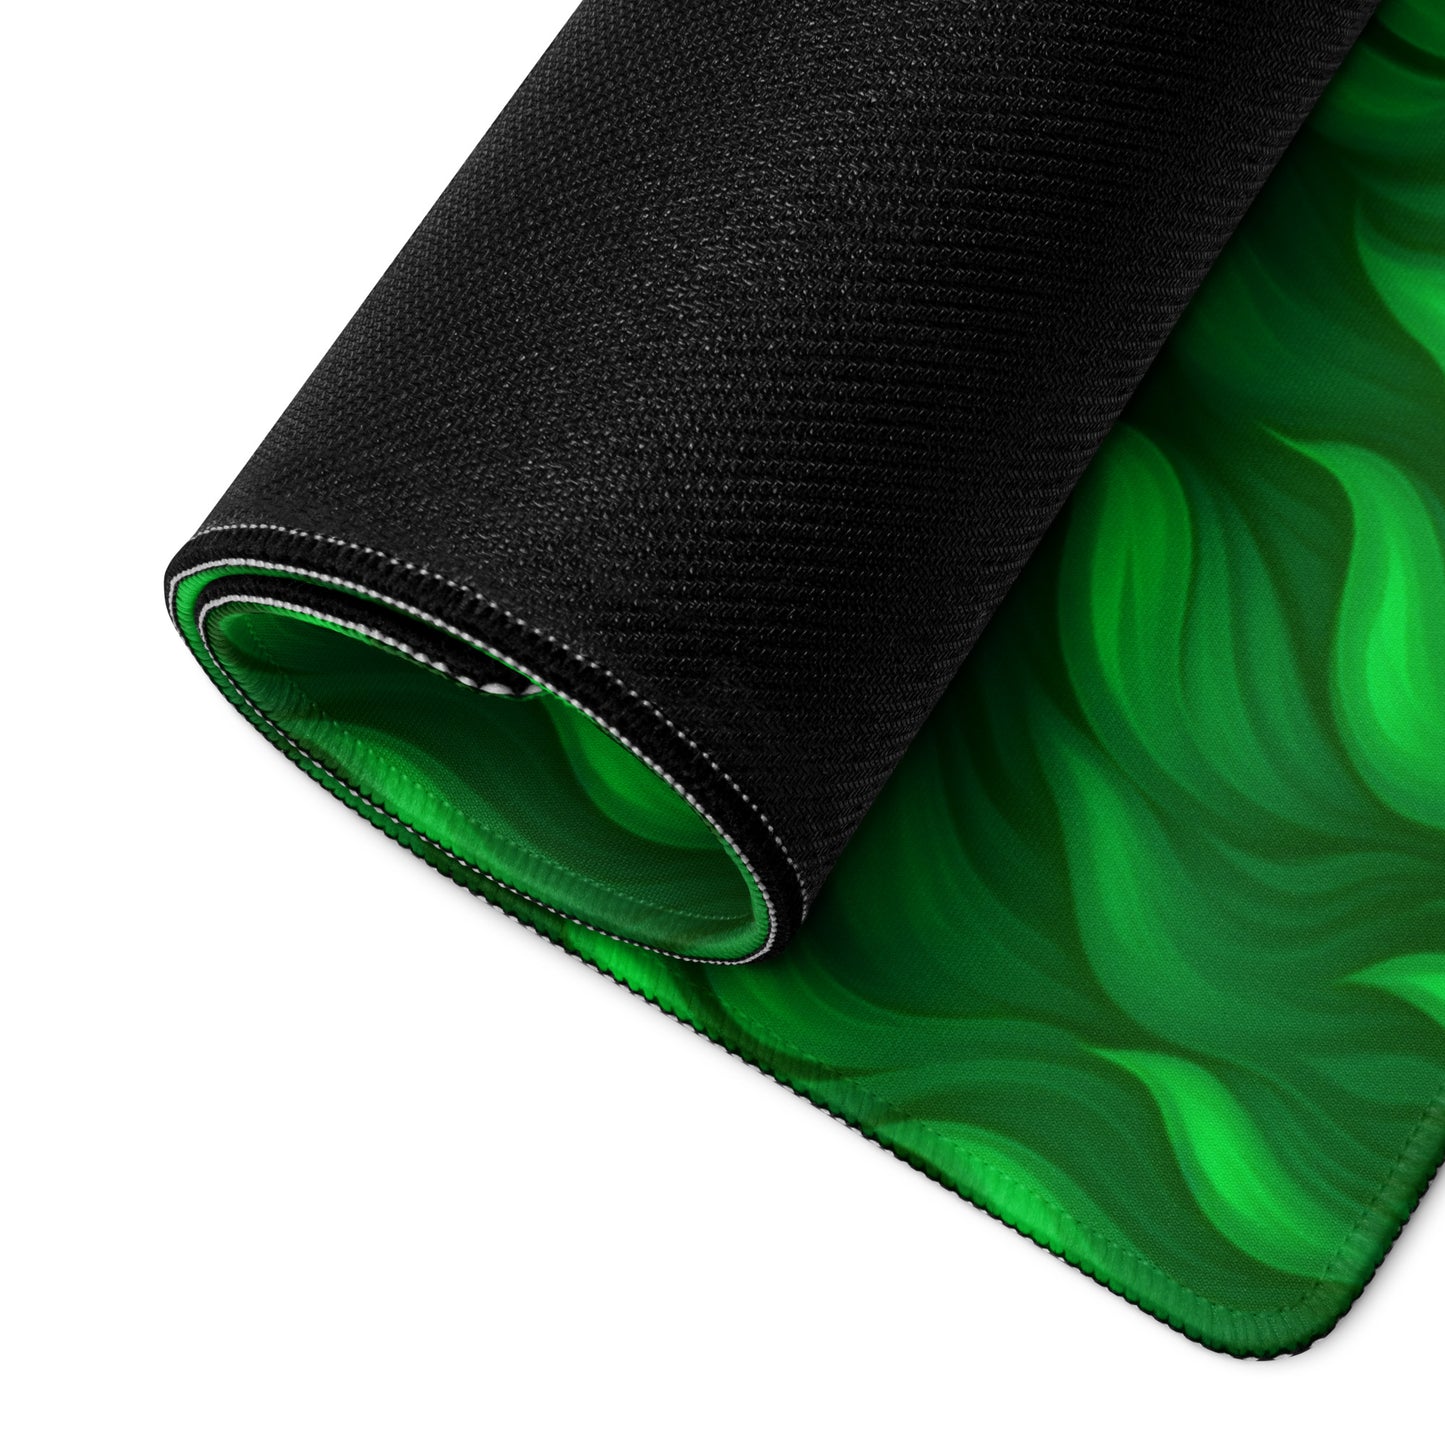 A 36" x 18" desk pad with a wavy flame pattern on it rolled up. Green in color.